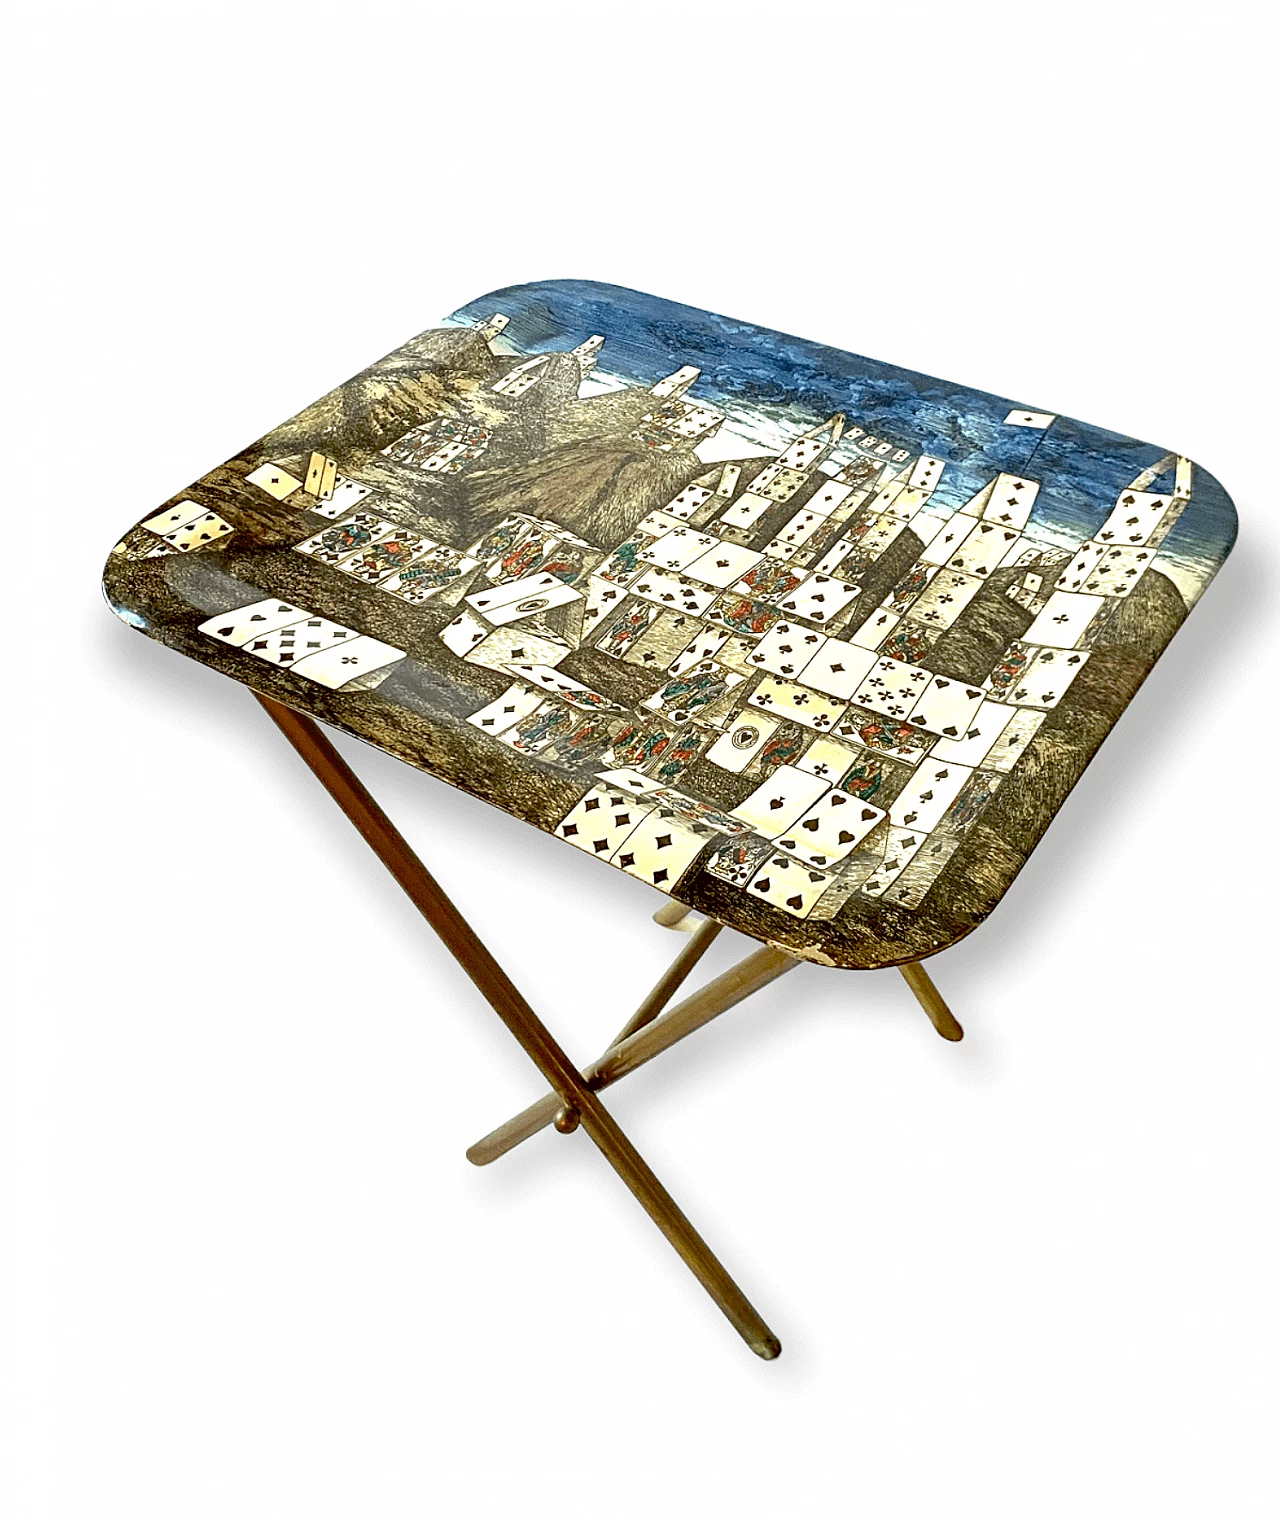 Folding City of Cards coffee table by Piero Fornasetti, 1950s 2